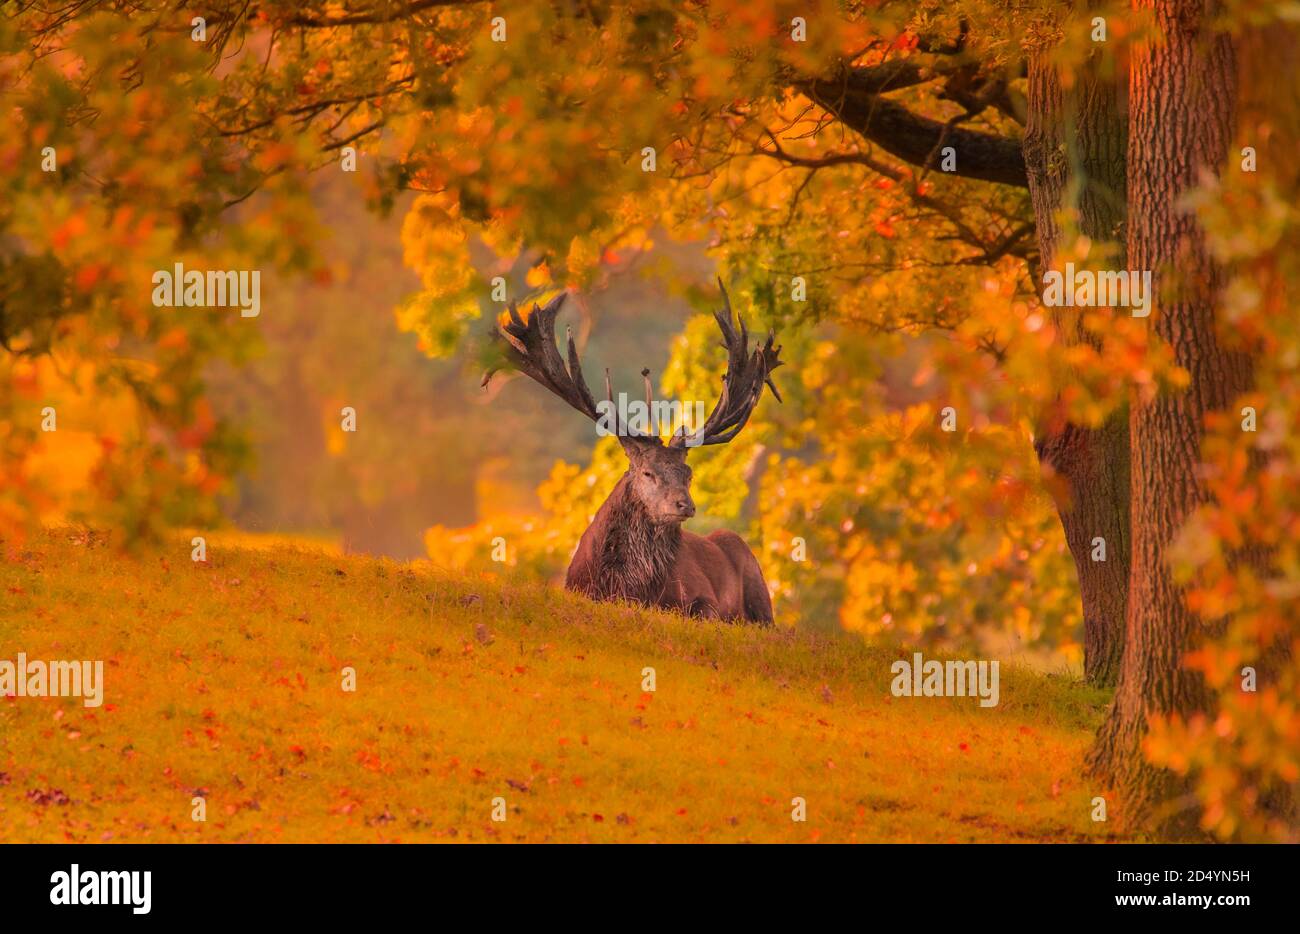 Red Deer Stag, Woburn Deer Park, autunno 2020, Bedfordshire, Regno Unito Foto Stock